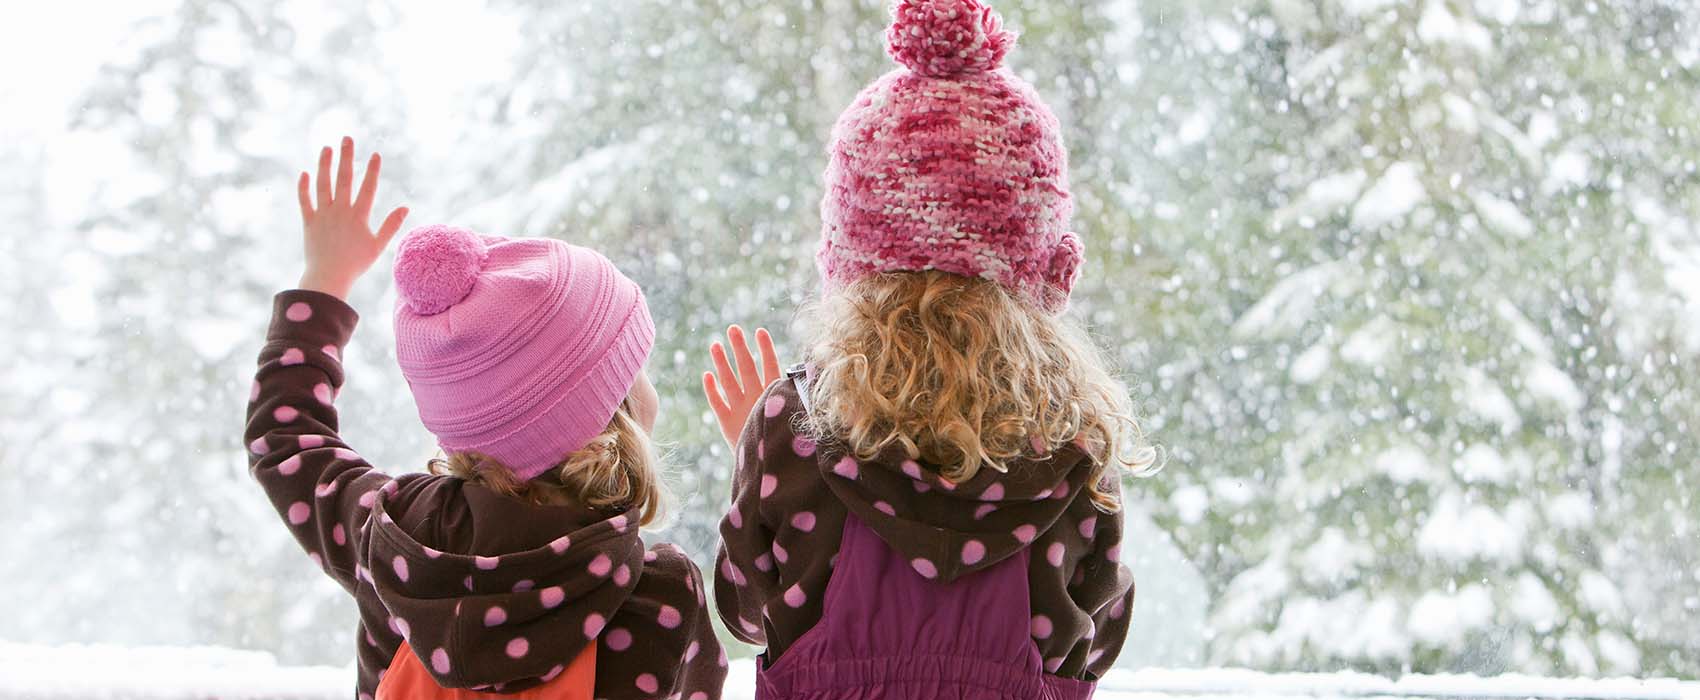 Two young girls in pajamas and knit hats looking out window at snow falling